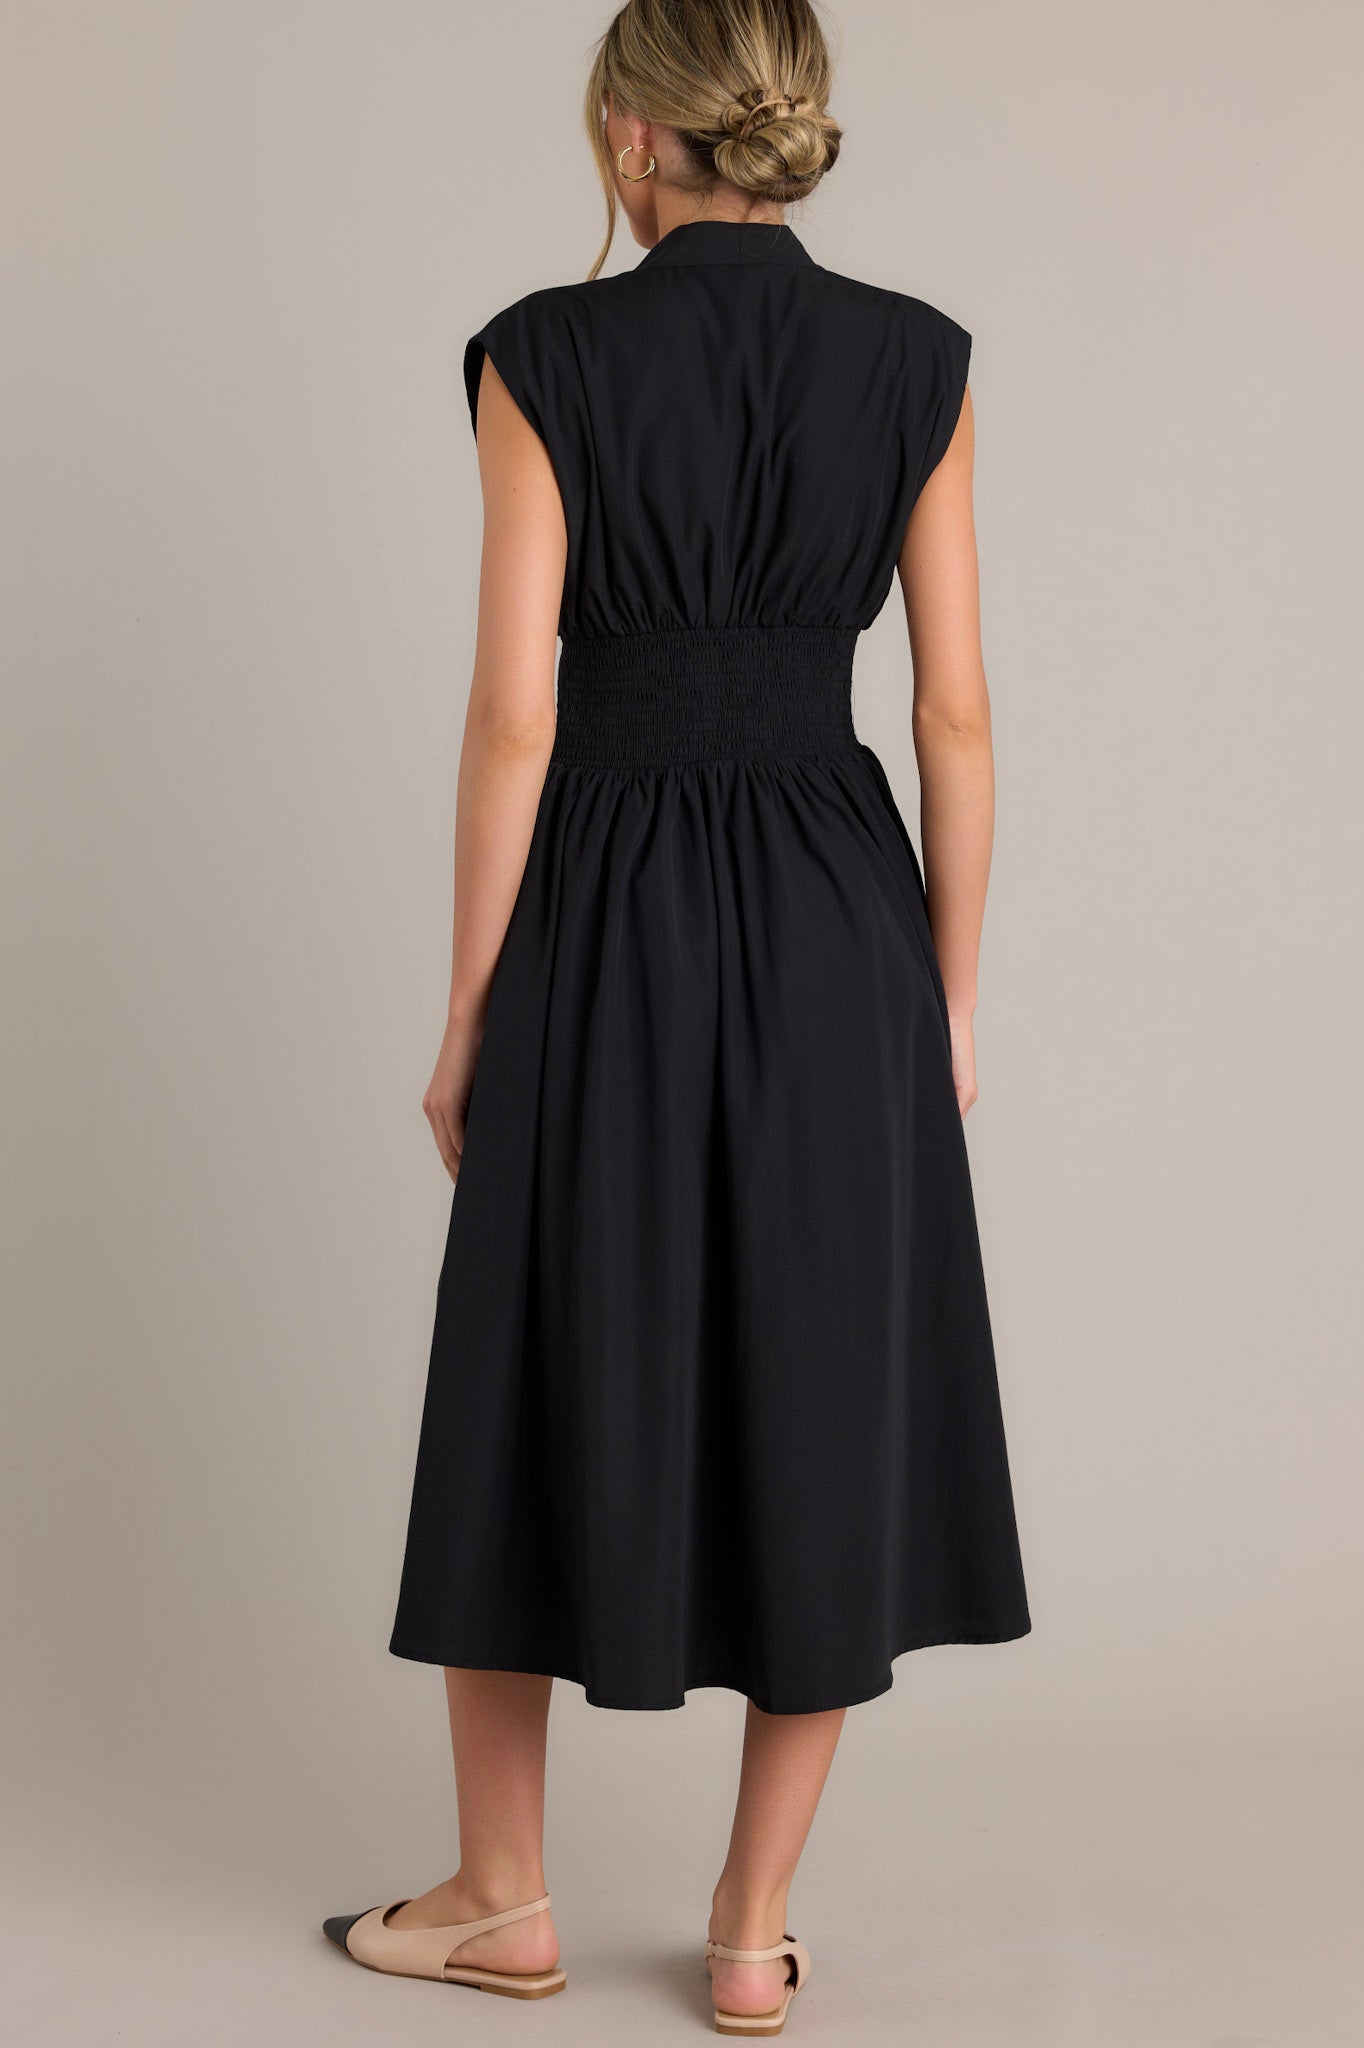 Back view of a black midi dress highlighting the padded shoulders, smocked waist, and overall fit.